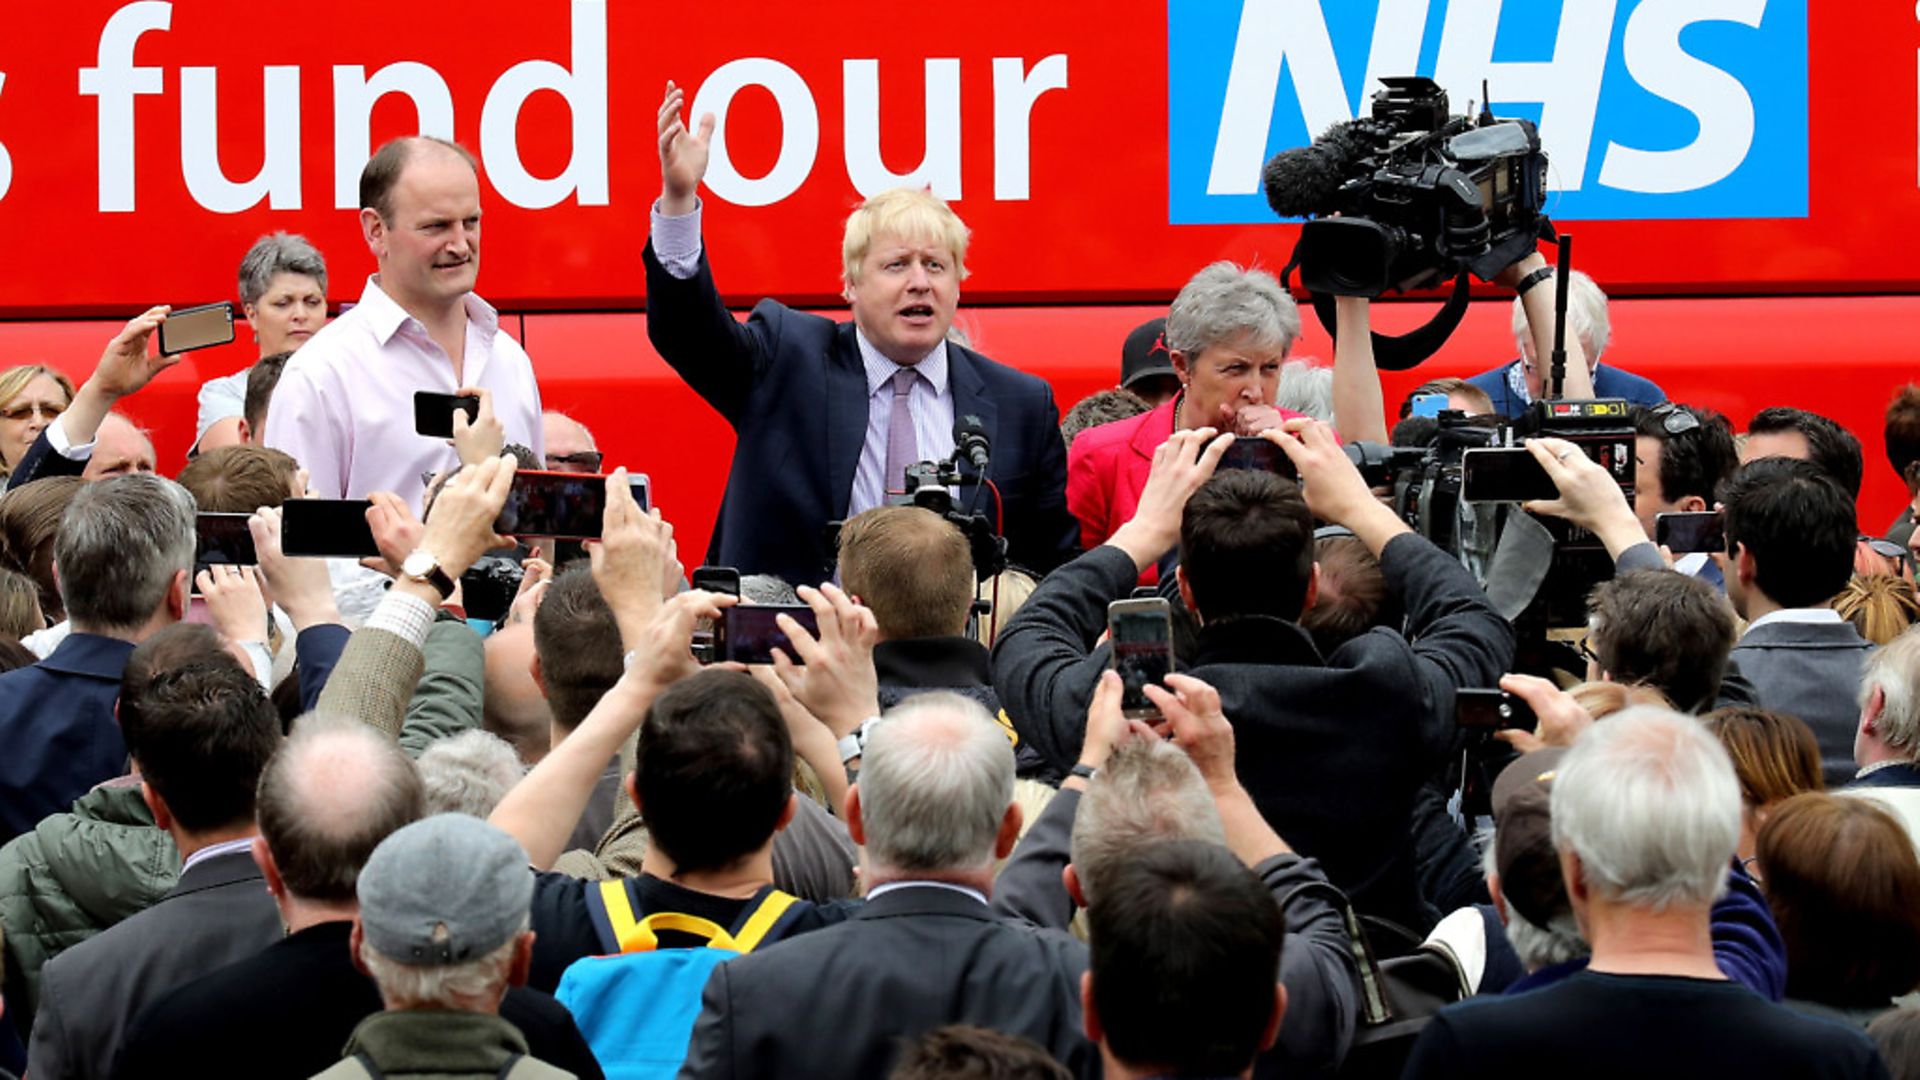 Boris Johnson MP, Labour MP Gisela Stuart and UKIP MP Douglas Carswell address the people of Stafford in Market Square during the Vote Leave, Brexit Battle Bus tour on May 17, 20016 in Stafford, England. Boris Johnson and the Vote Leave campaign are touring the UK in their Brexit Battle Bus. The campaign is hoping to persuade voters to back leaving the European Union in the Referendum on the 23rd June 2016.  (Photo by Christopher Furlong/Getty Images) - Credit: Getty Images